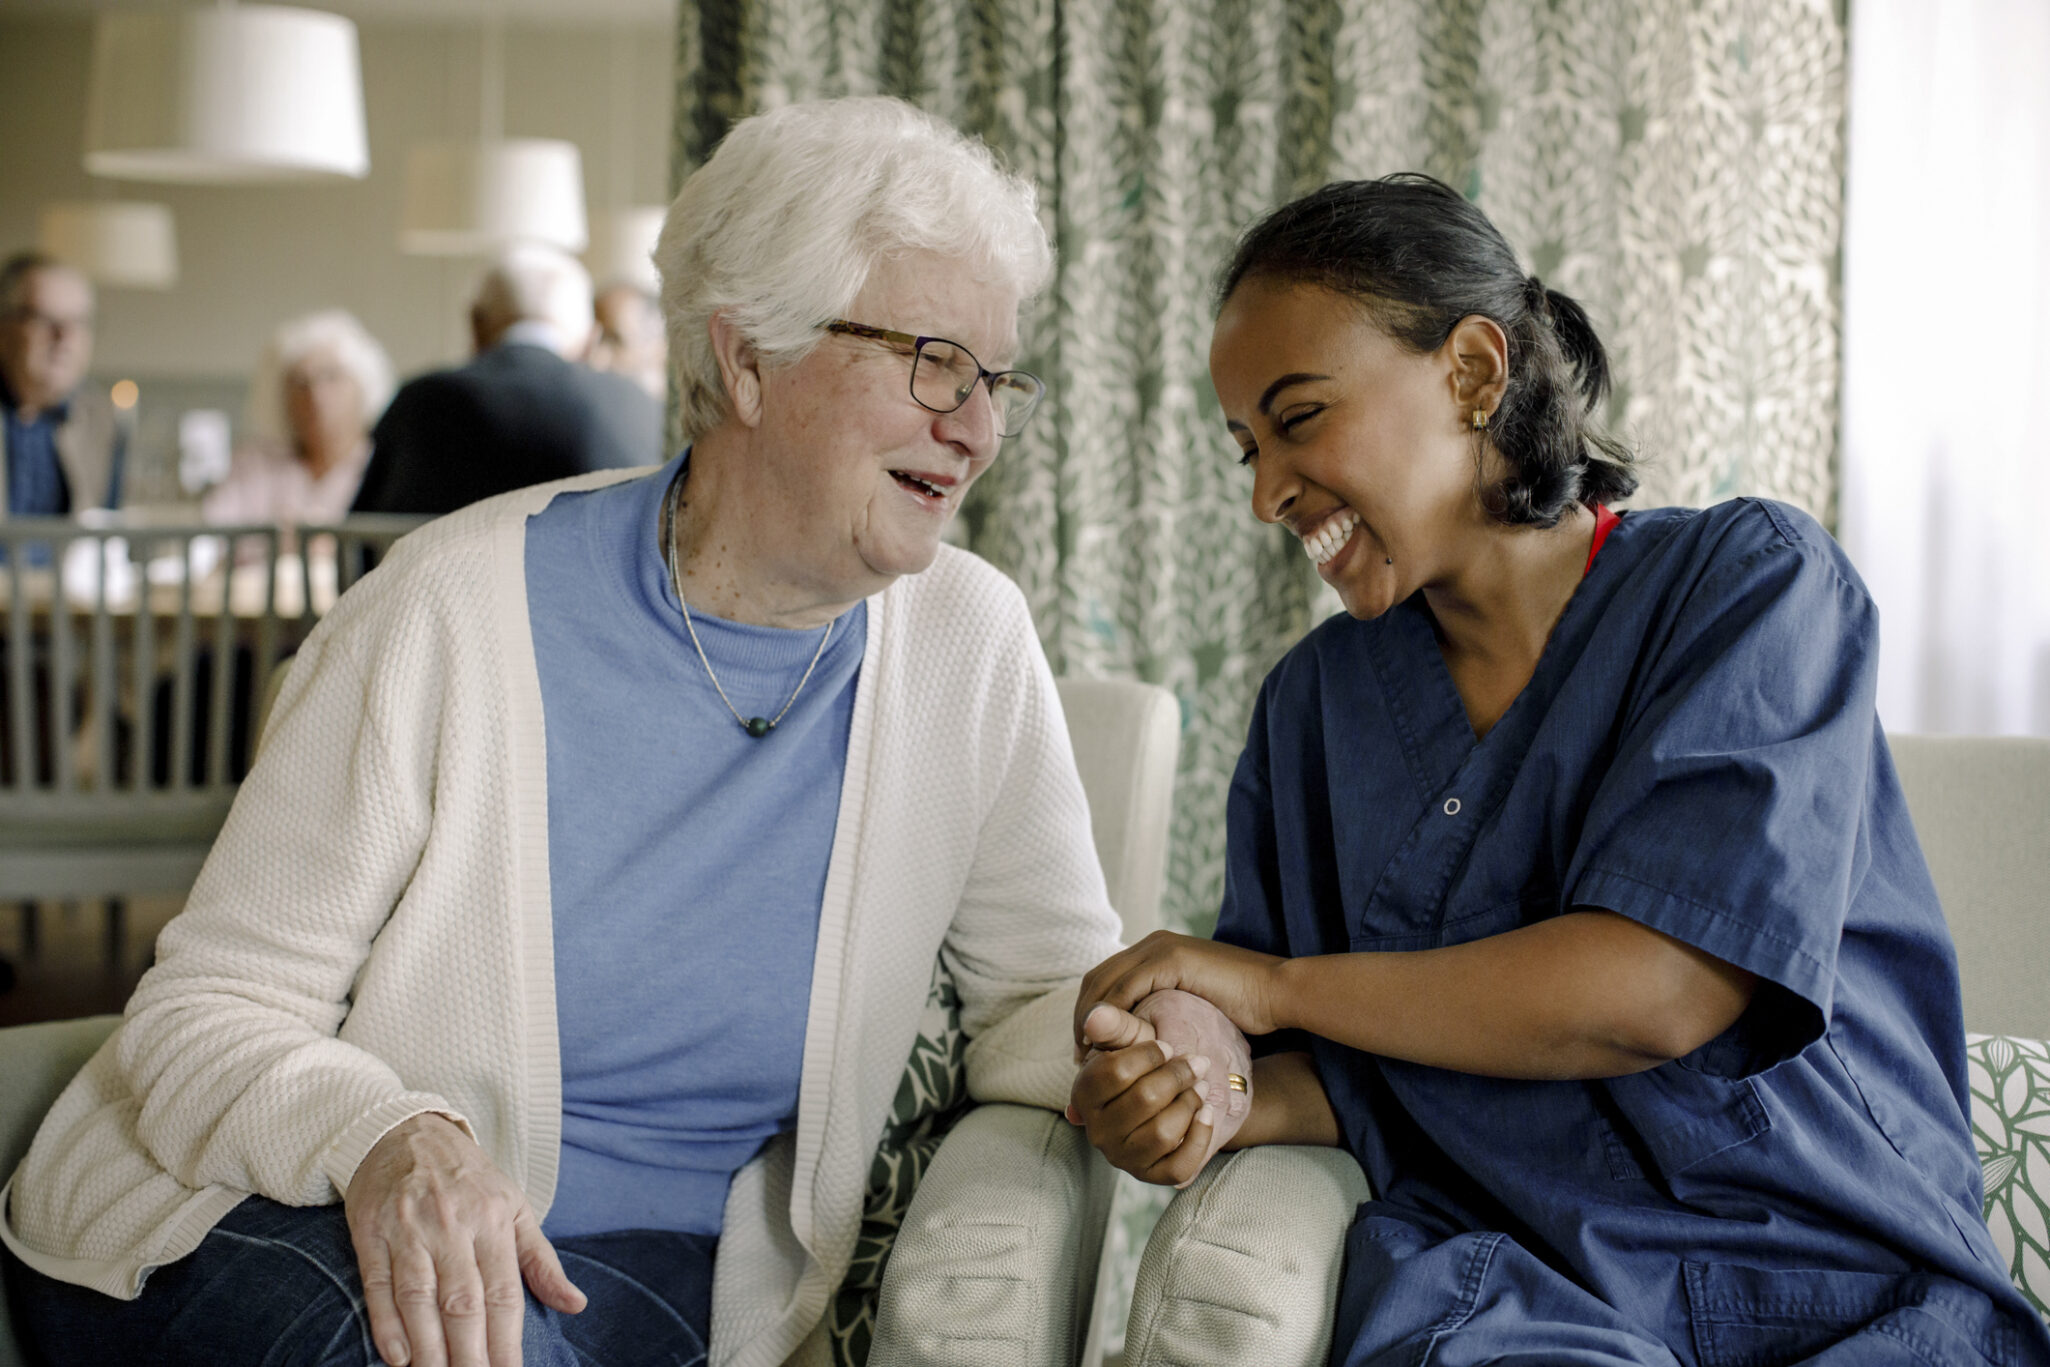 A health care worker sits side by side with an elderly woman and they share a laugh and hold hands